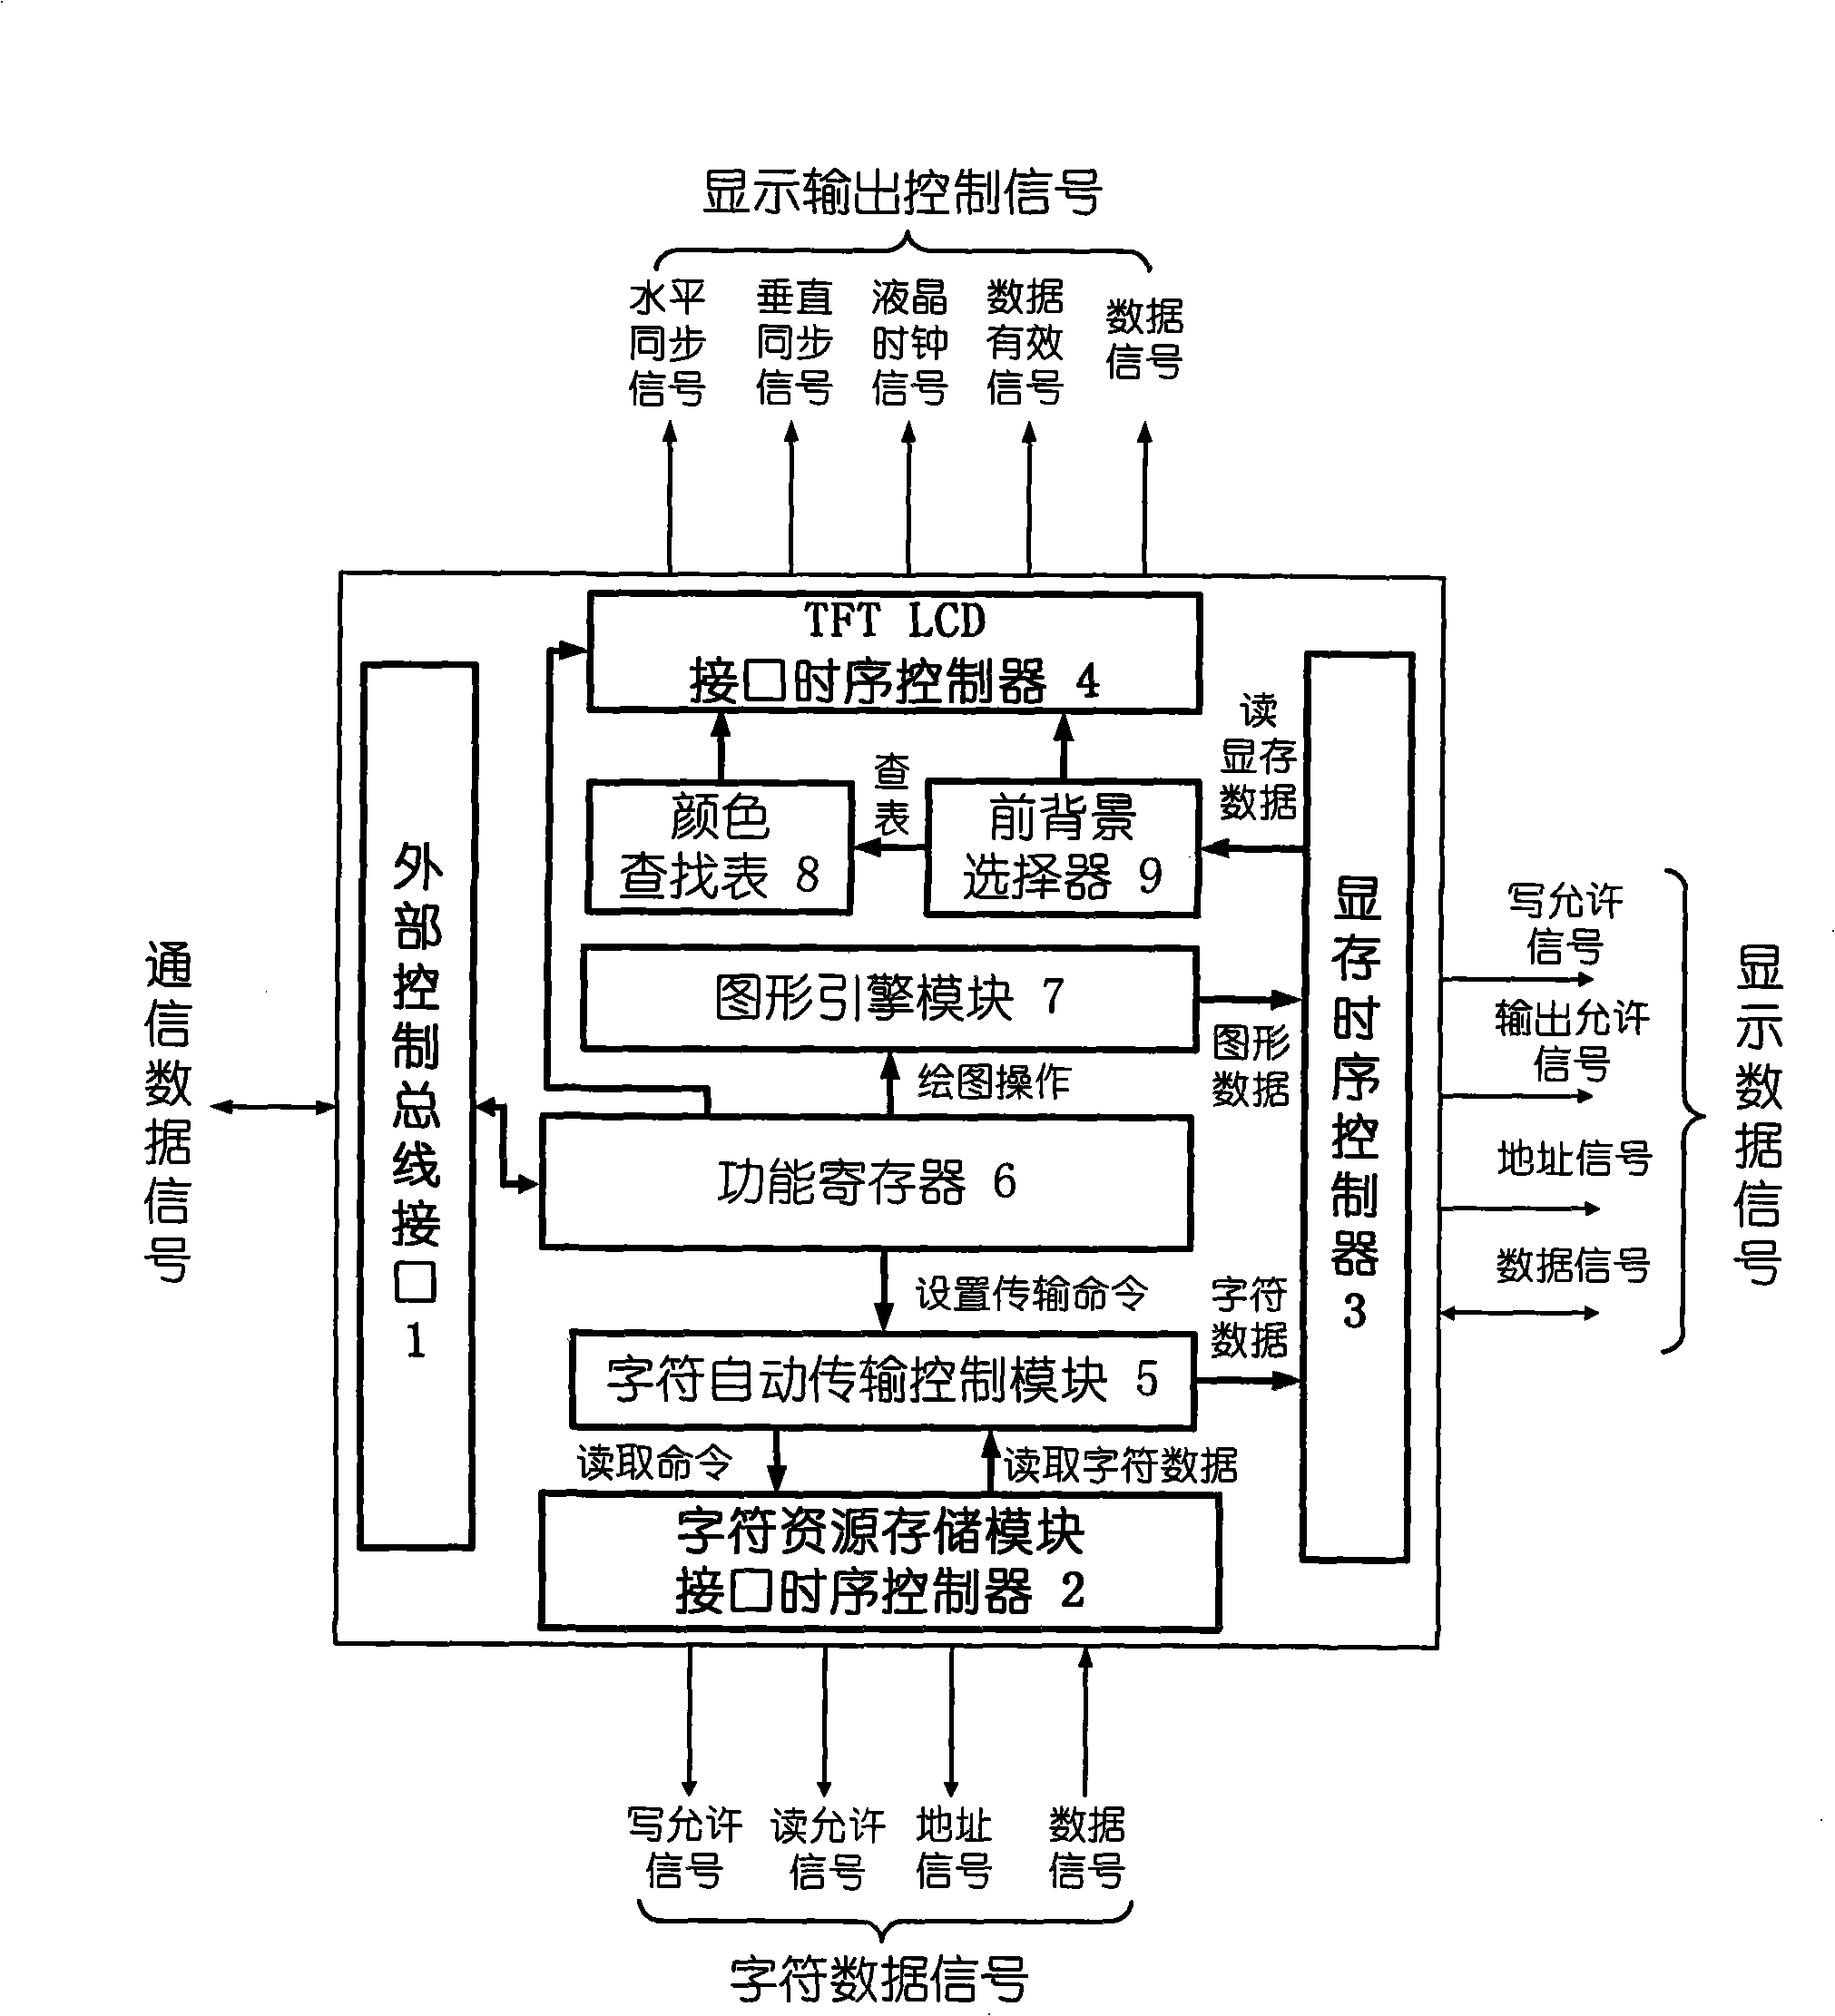 LCD graphical display controller and control method